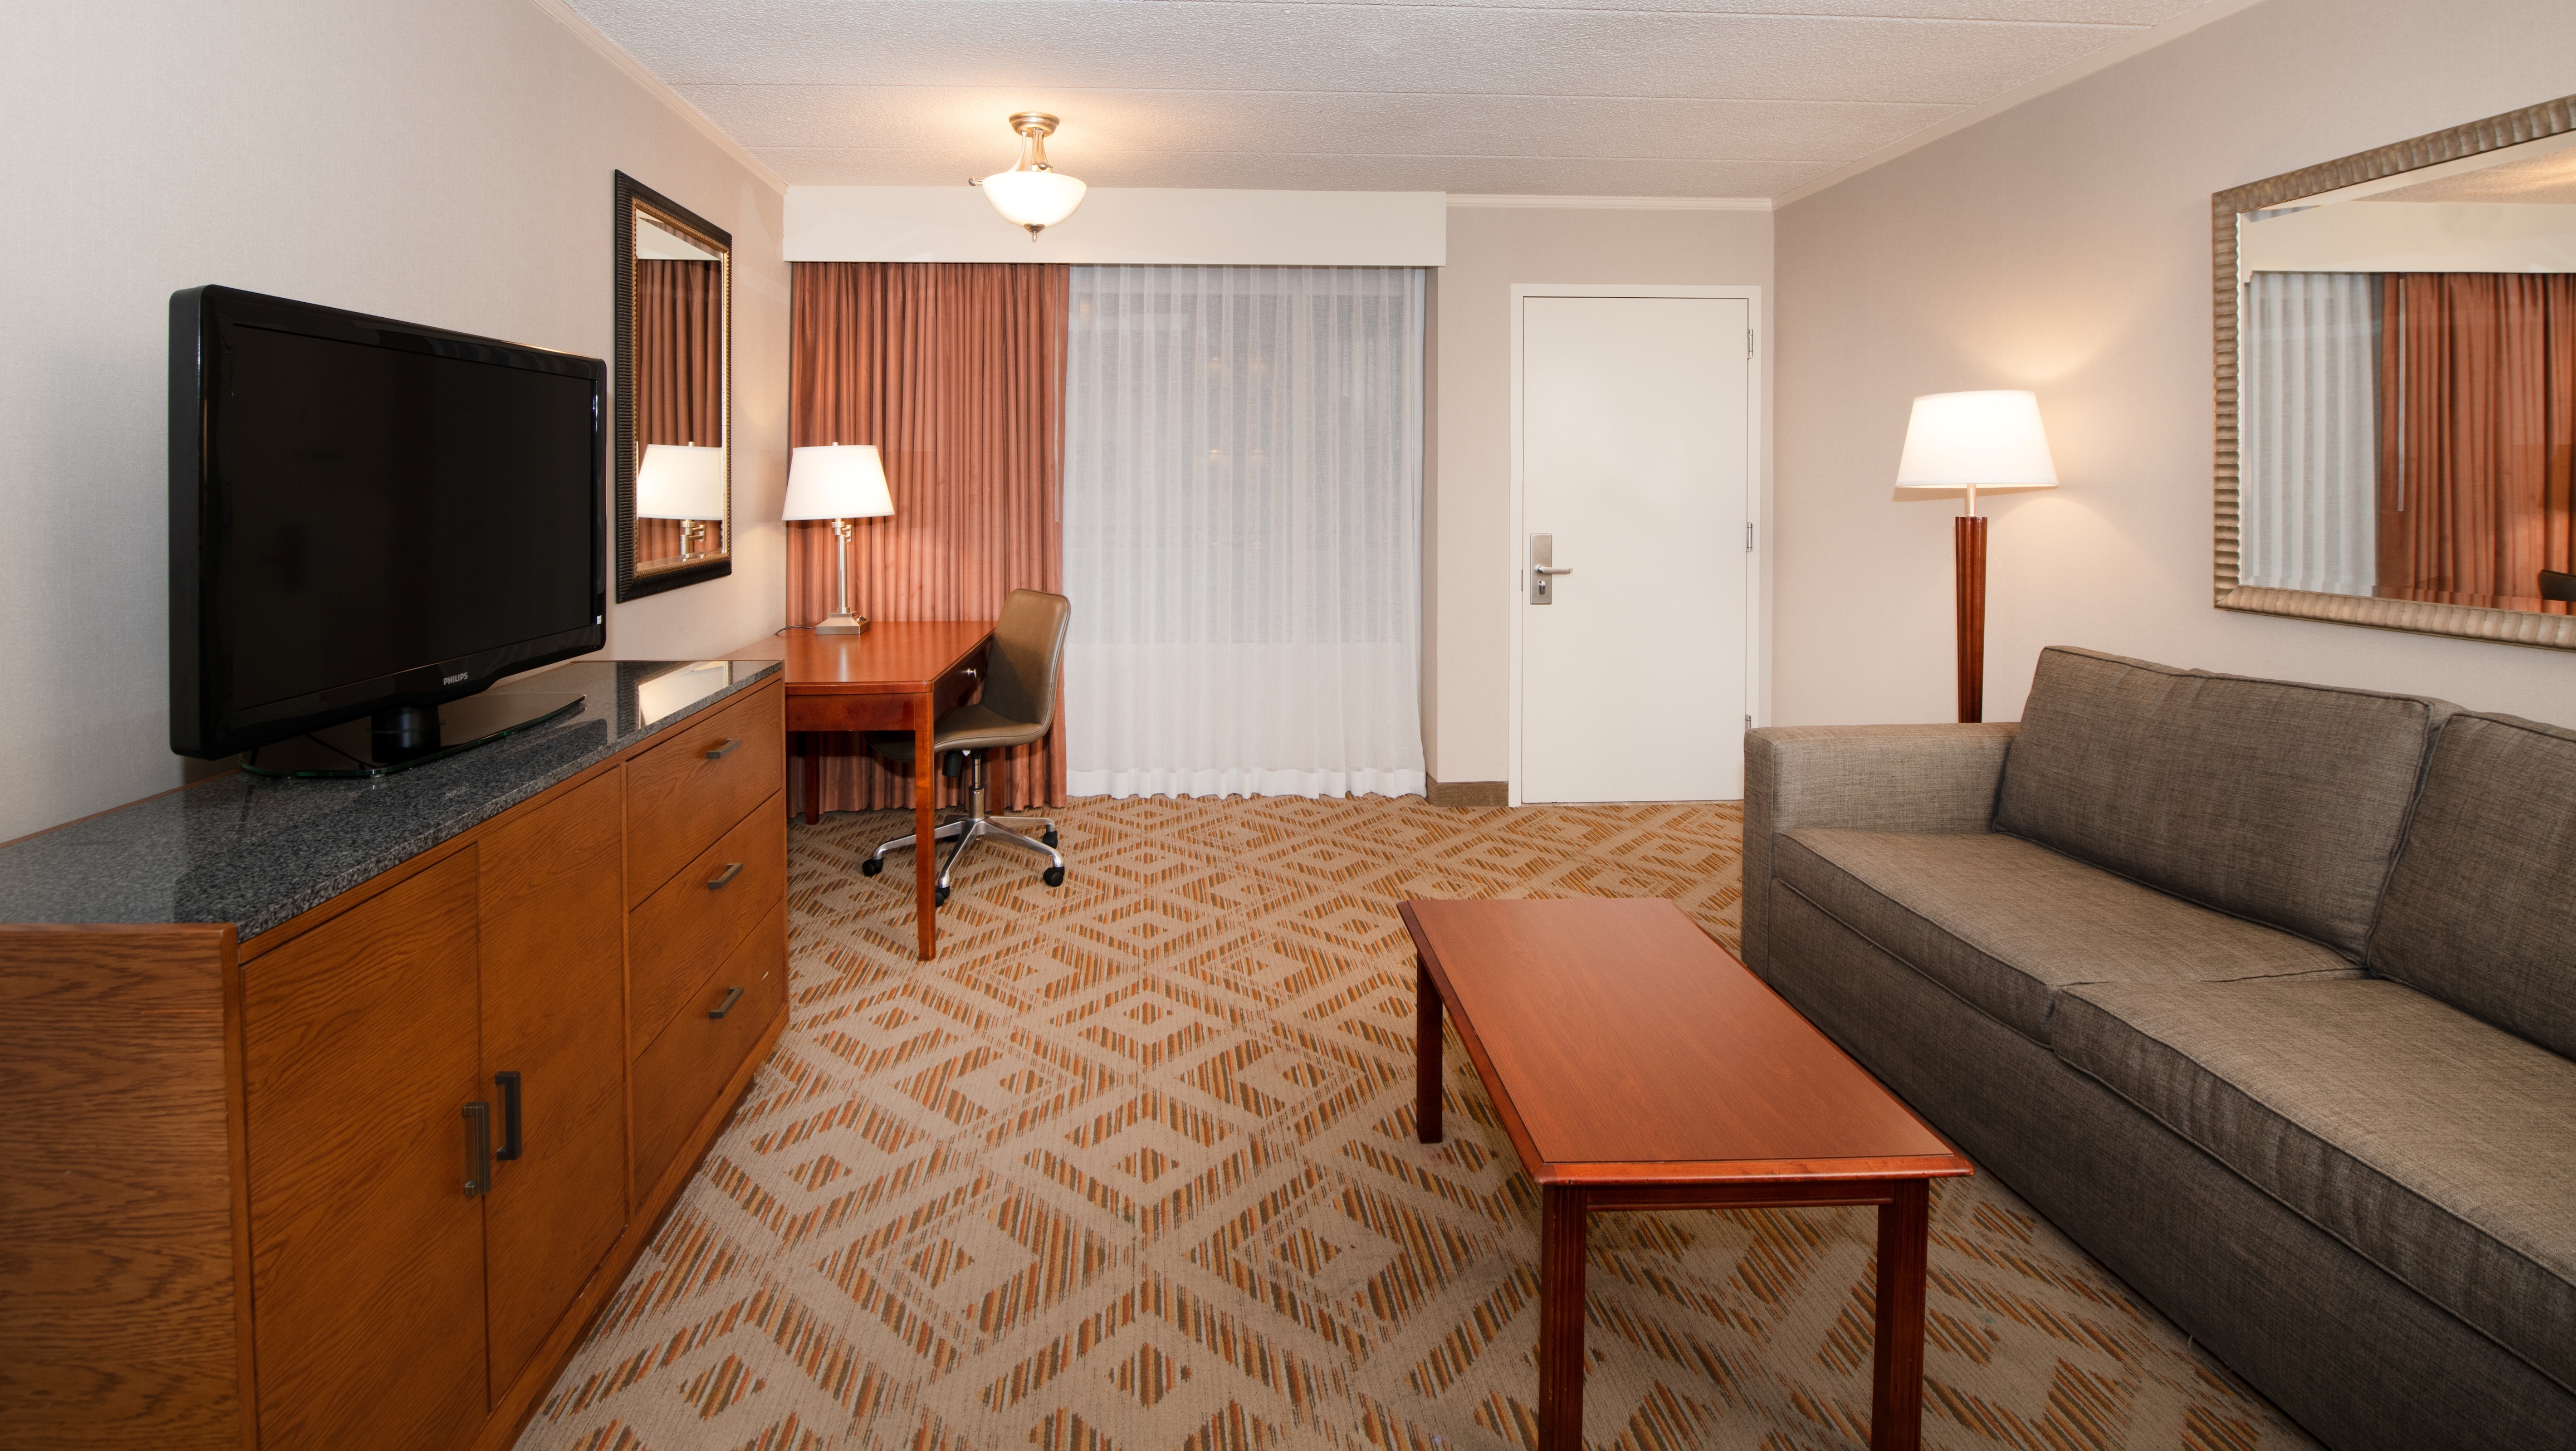 Our suites are elegantly appointed with modern furnishings and chic décor.